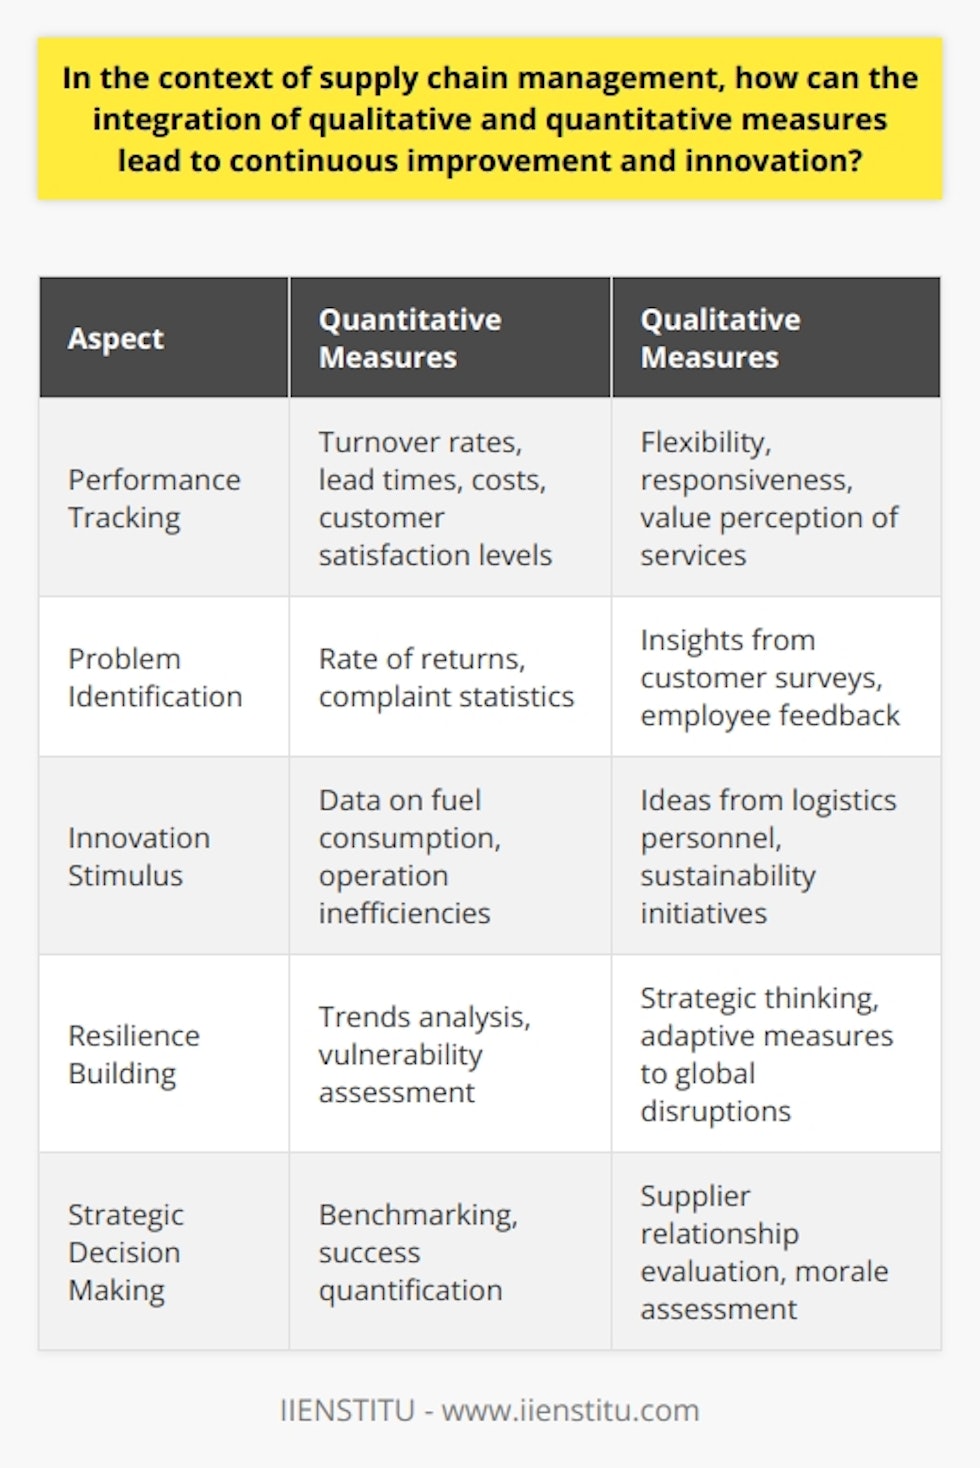 In the increasingly complex world of supply chain management, the confluence of qualitative and quantitative measures is not merely beneficial; it is essential for driving continuous improvement and spurring innovation. Quantitative measures provide structured, numerical data that can be tracked over time, offering a clear picture of performance metrics such as turnover rates, lead times, costs, and customer satisfaction levels. These metrics empower managers with the ability to benchmark and quantify success.On the other side of the equation, qualitative measures delve into the nuanced, human factors that quantitative data often cannot capture. This includes insights into supplier relationships, employee morale, and the quality of customer engagements. Qualitative measures assess factors such as flexibility, responsiveness, and the overall value perception of the supply chain services rendered.When integrated effectively, both qualitative and quantitative measures can create a powerful feedback loop for improvement. For example, a quantitative metric may show a higher-than-average rate of returns or complaints, indicating a problem in the product quality or shipment handling. Qualitative analysis, obtained perhaps through customer surveys or employee focus groups, can then unearth underlying causes such as packaging deficiencies or lapses in quality control during production.The integration also fosters an environment conducive to innovation. Quantitative data might highlight excessive fuel consumption within transportation operations, signaling an opportunity for environmental and cost efficiencies. Qualitative feedback, perhaps from a brainstorming session with logistics personnel, might then lead to the adoption of alternative transportation routes or a transition to a more efficient fleet, blending operational data with creative problem solving.This hybrid analytical approach can be imperative for supply chain resilience, particularly in a landscape fraught with global disruptions such as political volatility, economic uncertainty, or health crises. Quantitative information enables swift identification of trends and vulnerabilities, while qualitative insights can support strategic pivots and innovative thinking needed to navigate and mitigate such challenges.In summary, the symphony of qualitative and quantitative data enables a comprehensive, 360-degree view of the supply chain landscape. Blending the structure and objectivity of quantifiable metrics with the depth and context of qualitative insights provides the full spectrum of intelligence needed to propel a culture of continuous advancement and inventive thinking within supply chain management. In a field where marginal gains can translate to significant competitive advantages, this integration is not merely a nice-to-have—it is a strategic imperative.